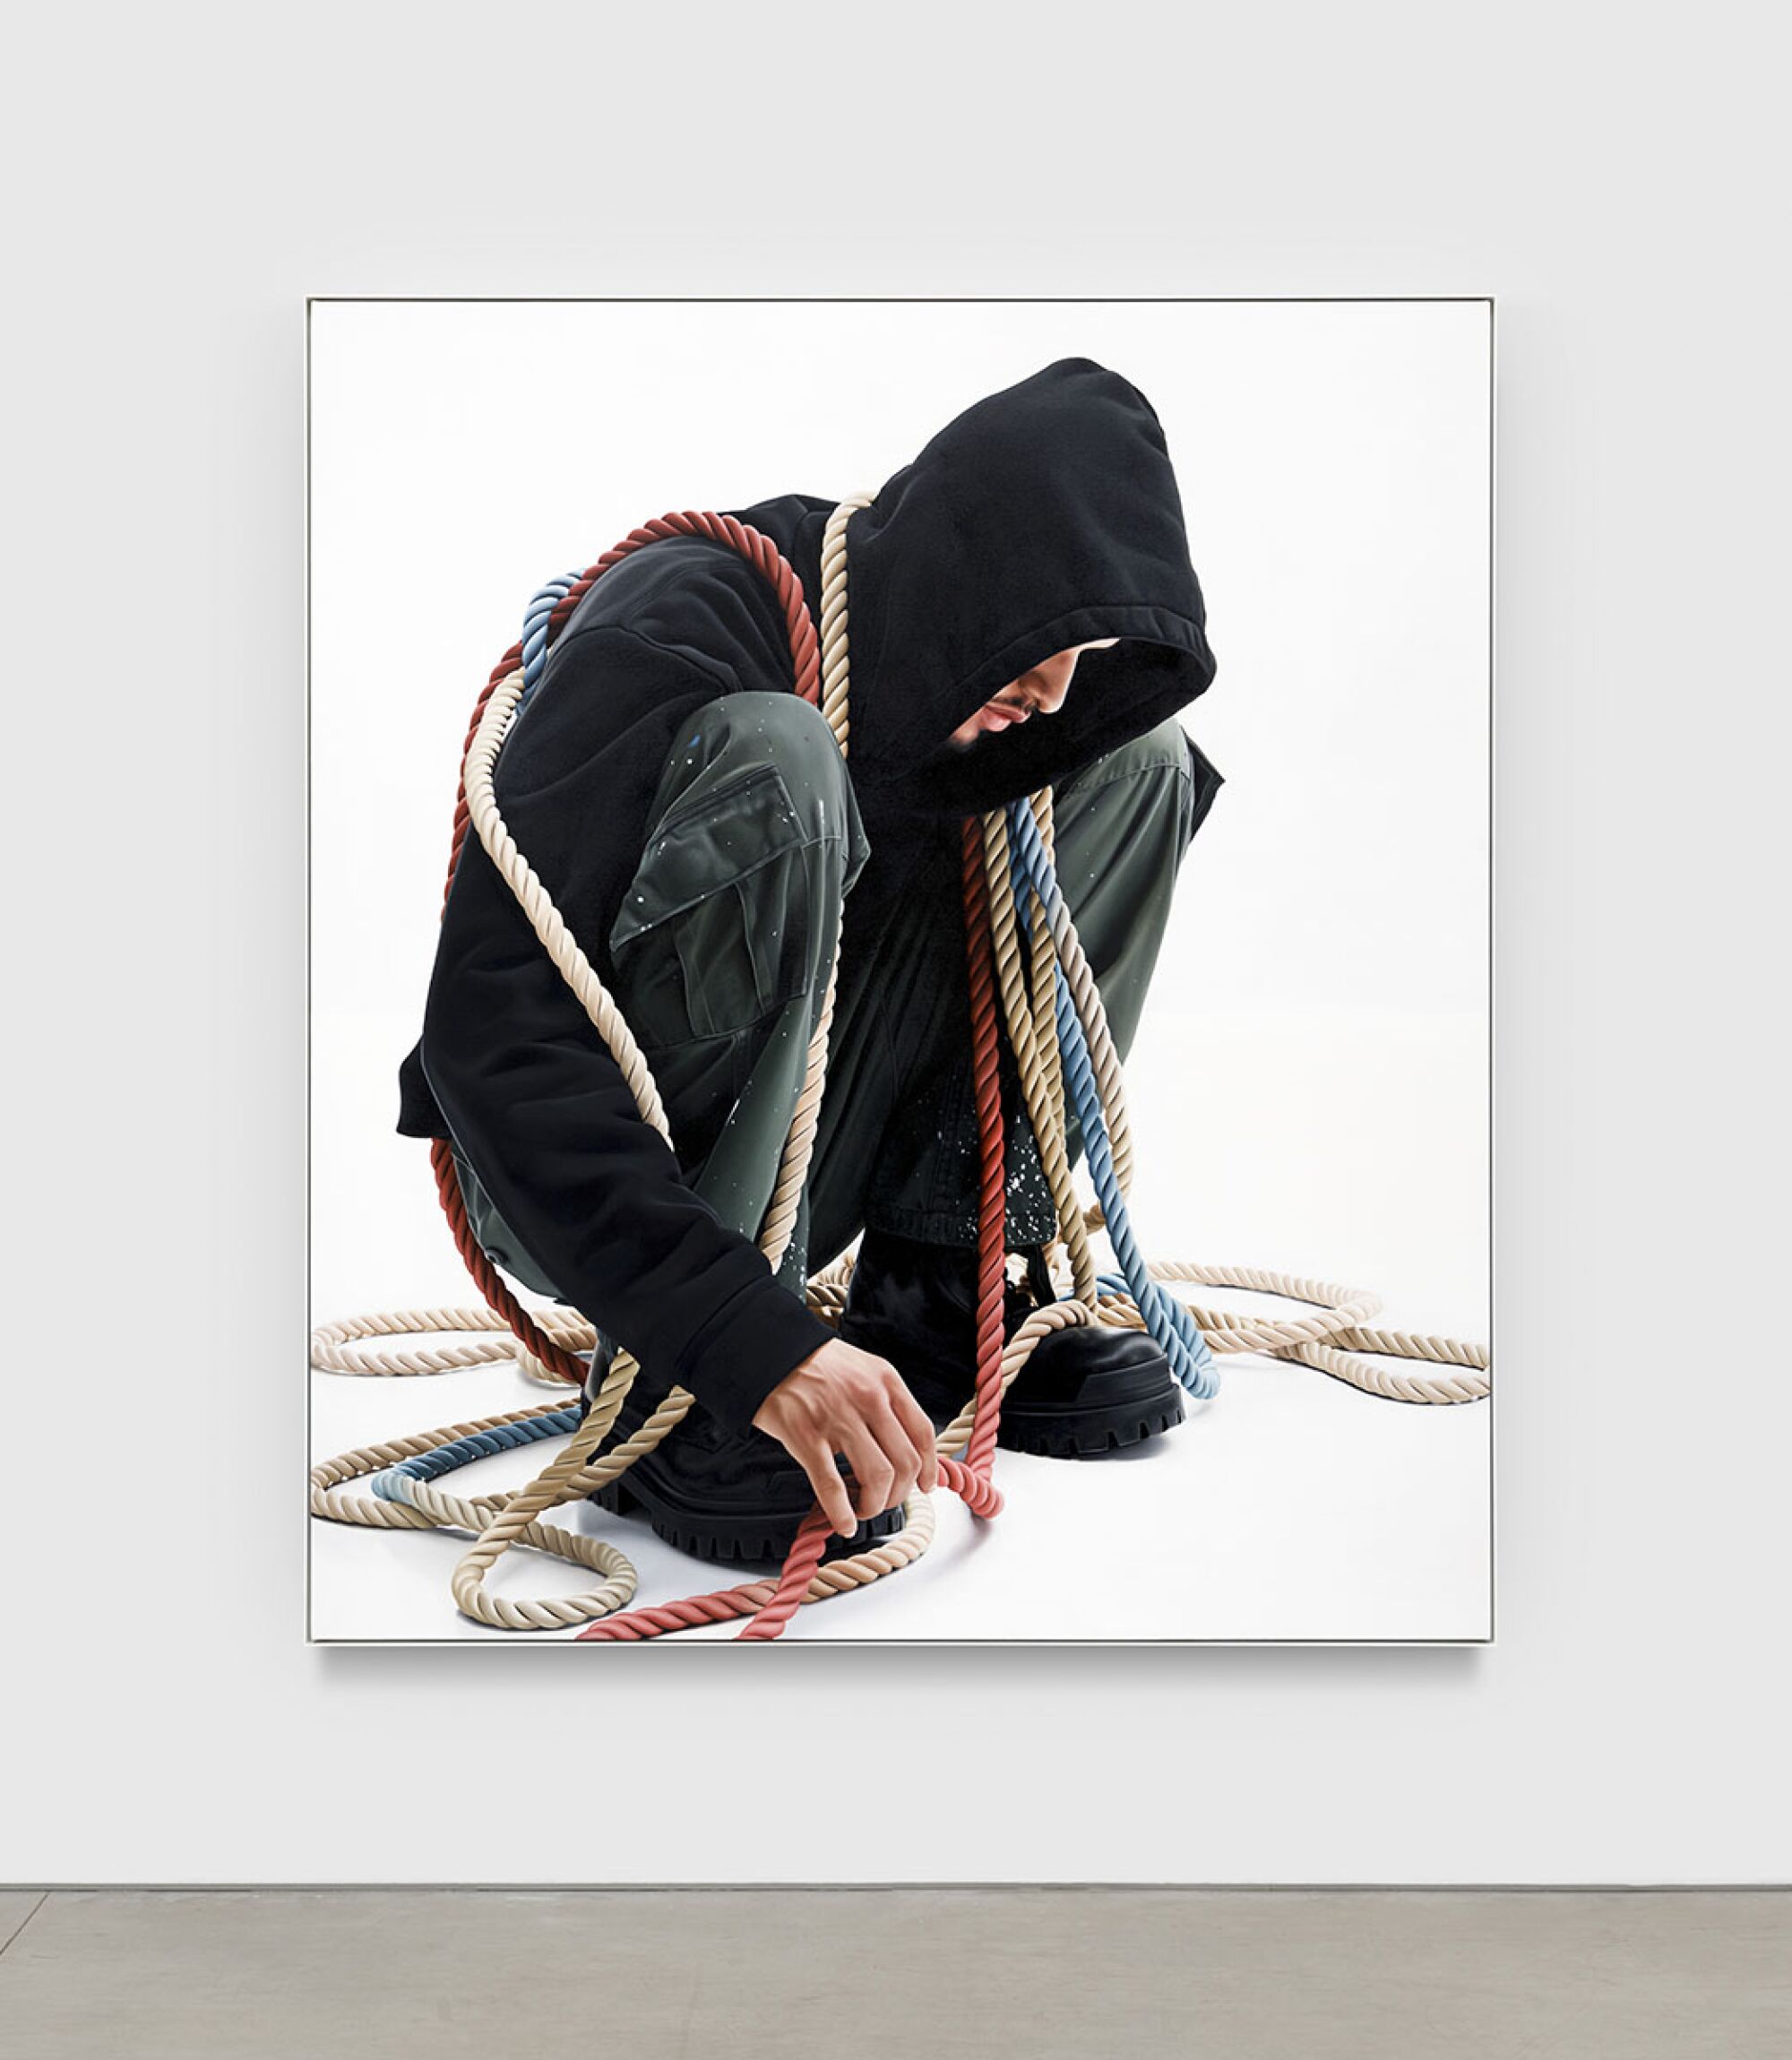 A crouching figure is draped with ropes